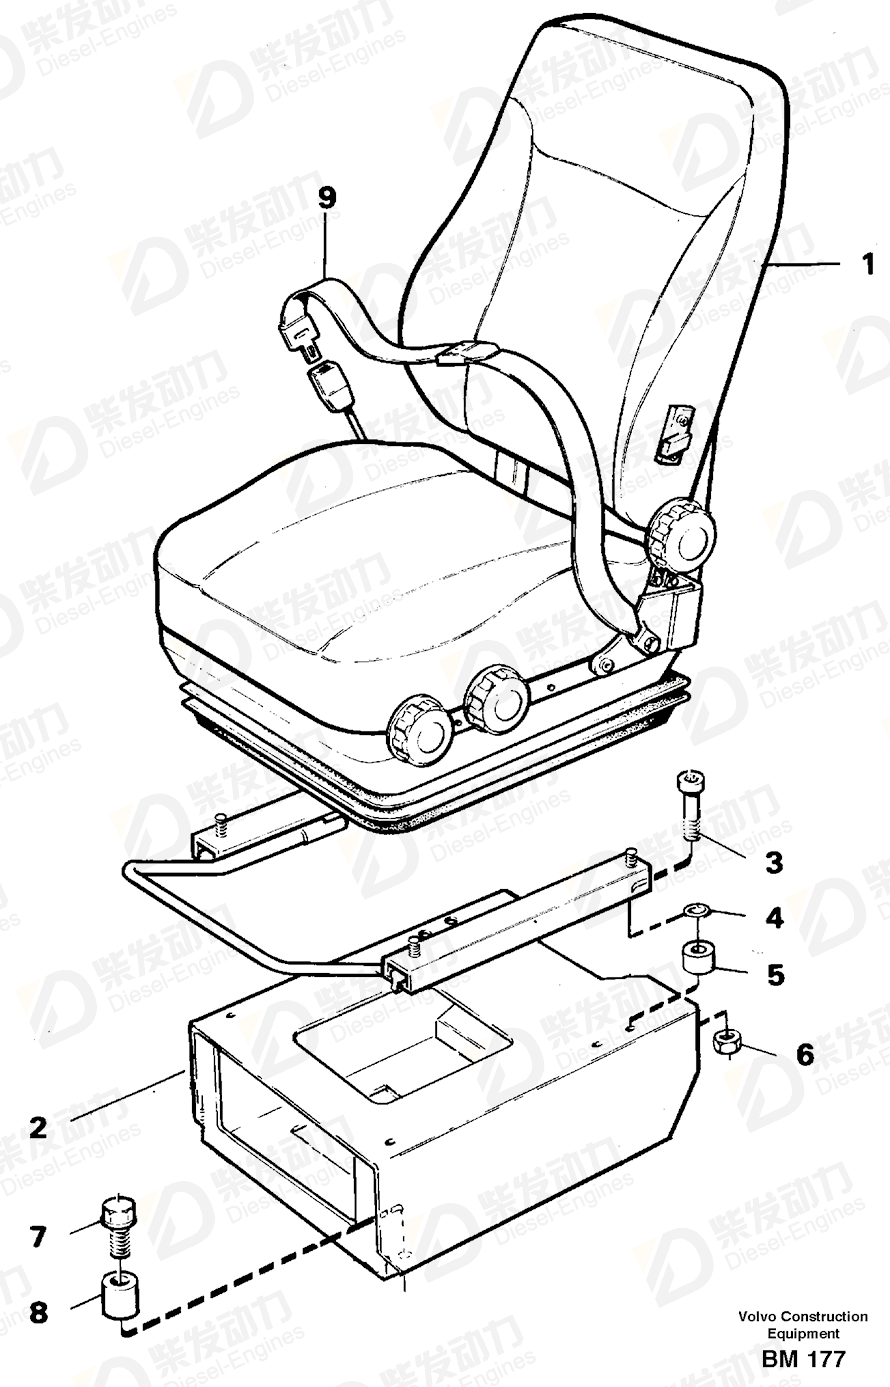 VOLVO Washer 4820650 Drawing